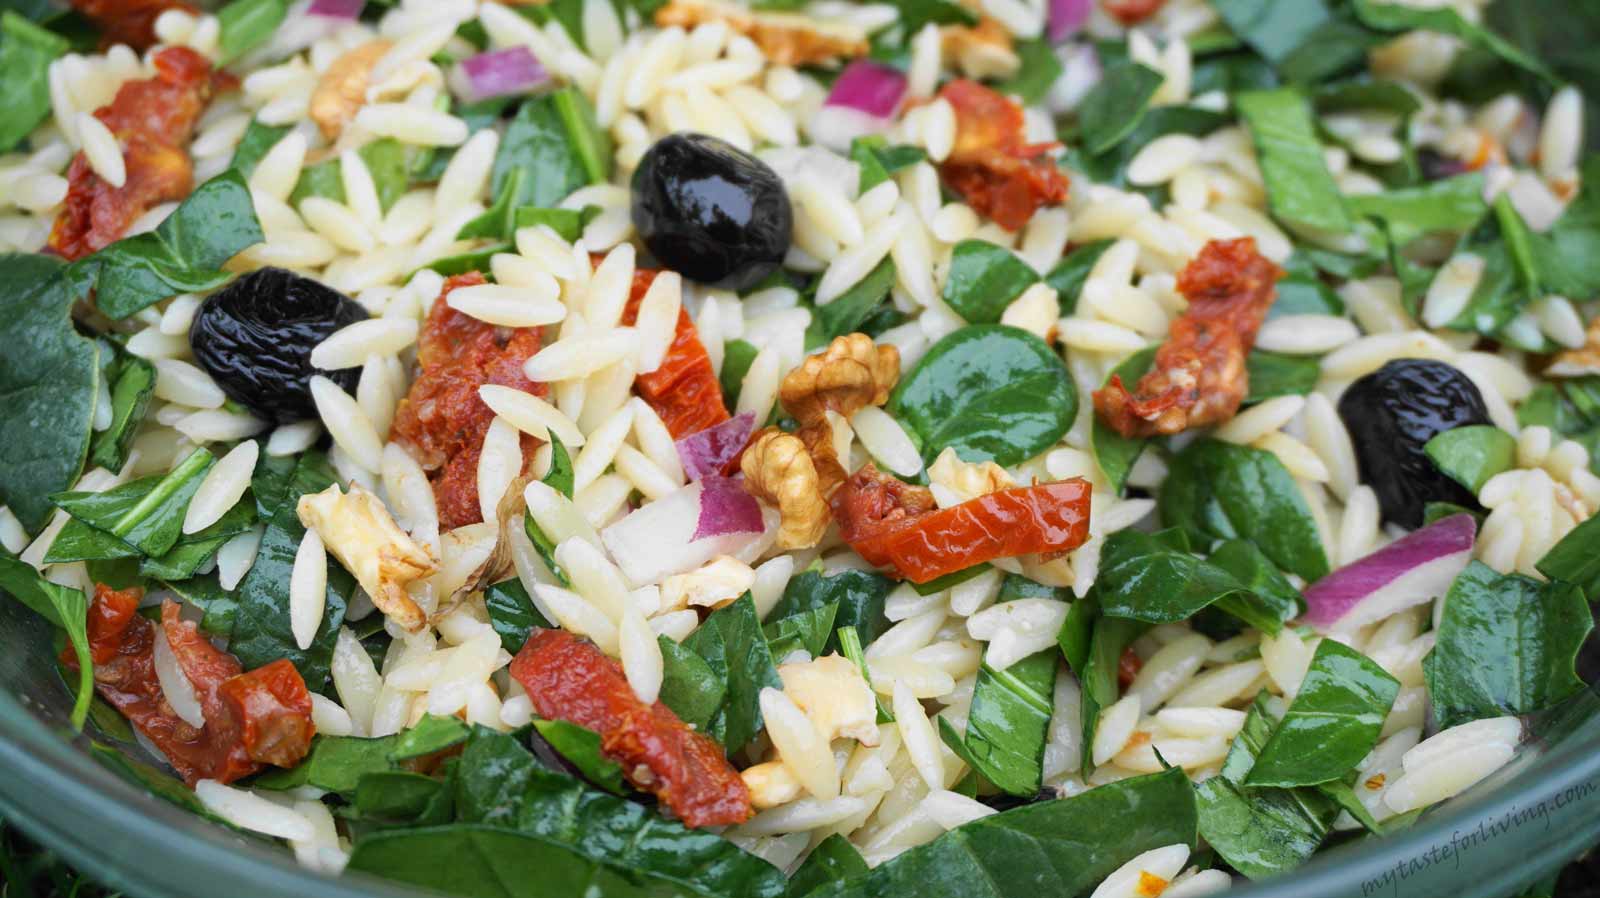 What is orzo and a recipe for a delicious and quick salad with orzo, spinach, sun dried tomatoes and walnuts, which I am sure will impress you.